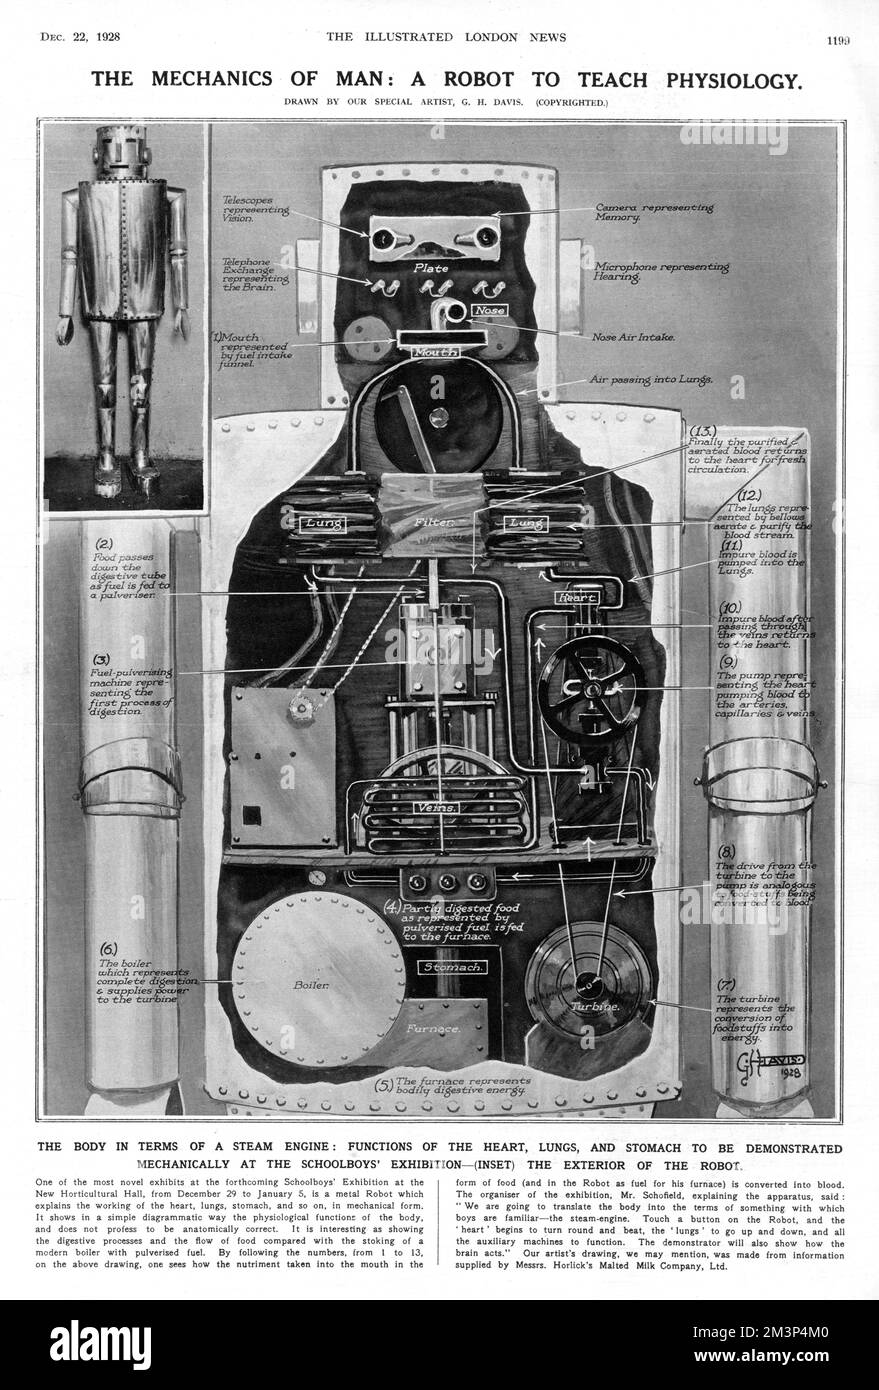 One of the novel exhibits on display at the Schoolboys' Exhibition at the New Horticultural Hall, London in the Winter of 1928-9; a metal robot which explained the workings of the heart, lungs, stomach etc in mechanical form.  The organiser of the exhibition, Mr Schofield, explained the apparatus saying, 'We are going to translate the body into the terms of something with which boys are familiar - the steam-engine.' Touch a button on the Robot and the 'heart' begins to beat, the 'lungs' go up and down, and all the auxiliary machines function.  The robot was part of a display by Horlick's Malte Stock Photo